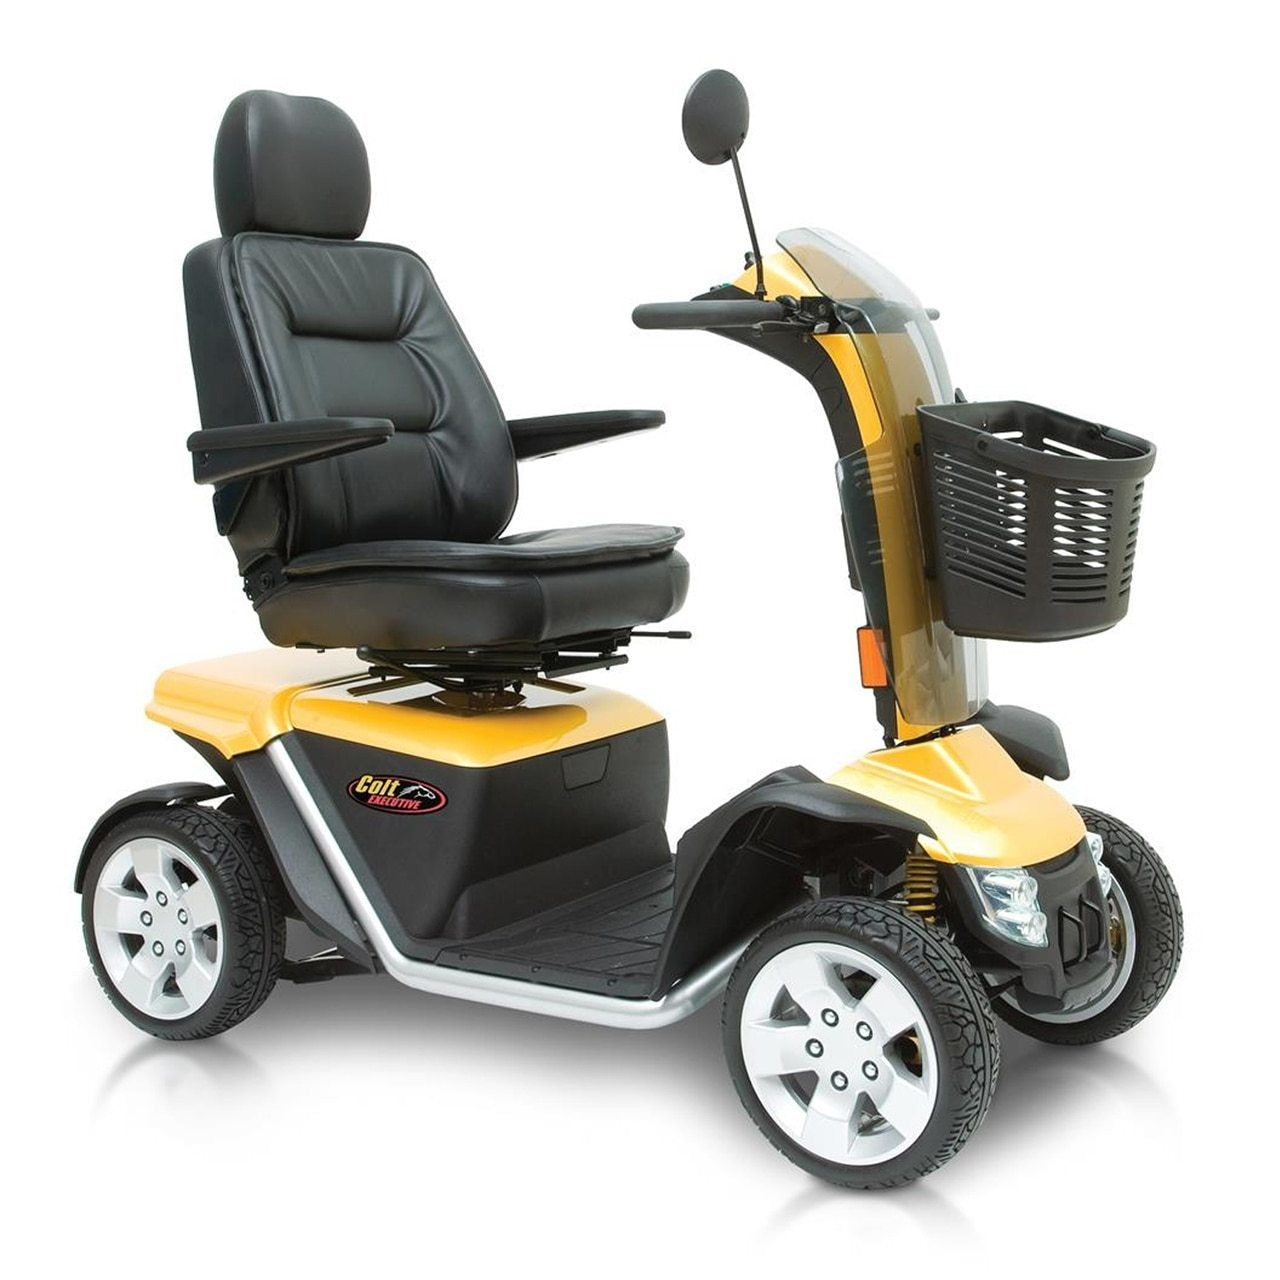 Colt  Executive 8 mph Mobility Scooter